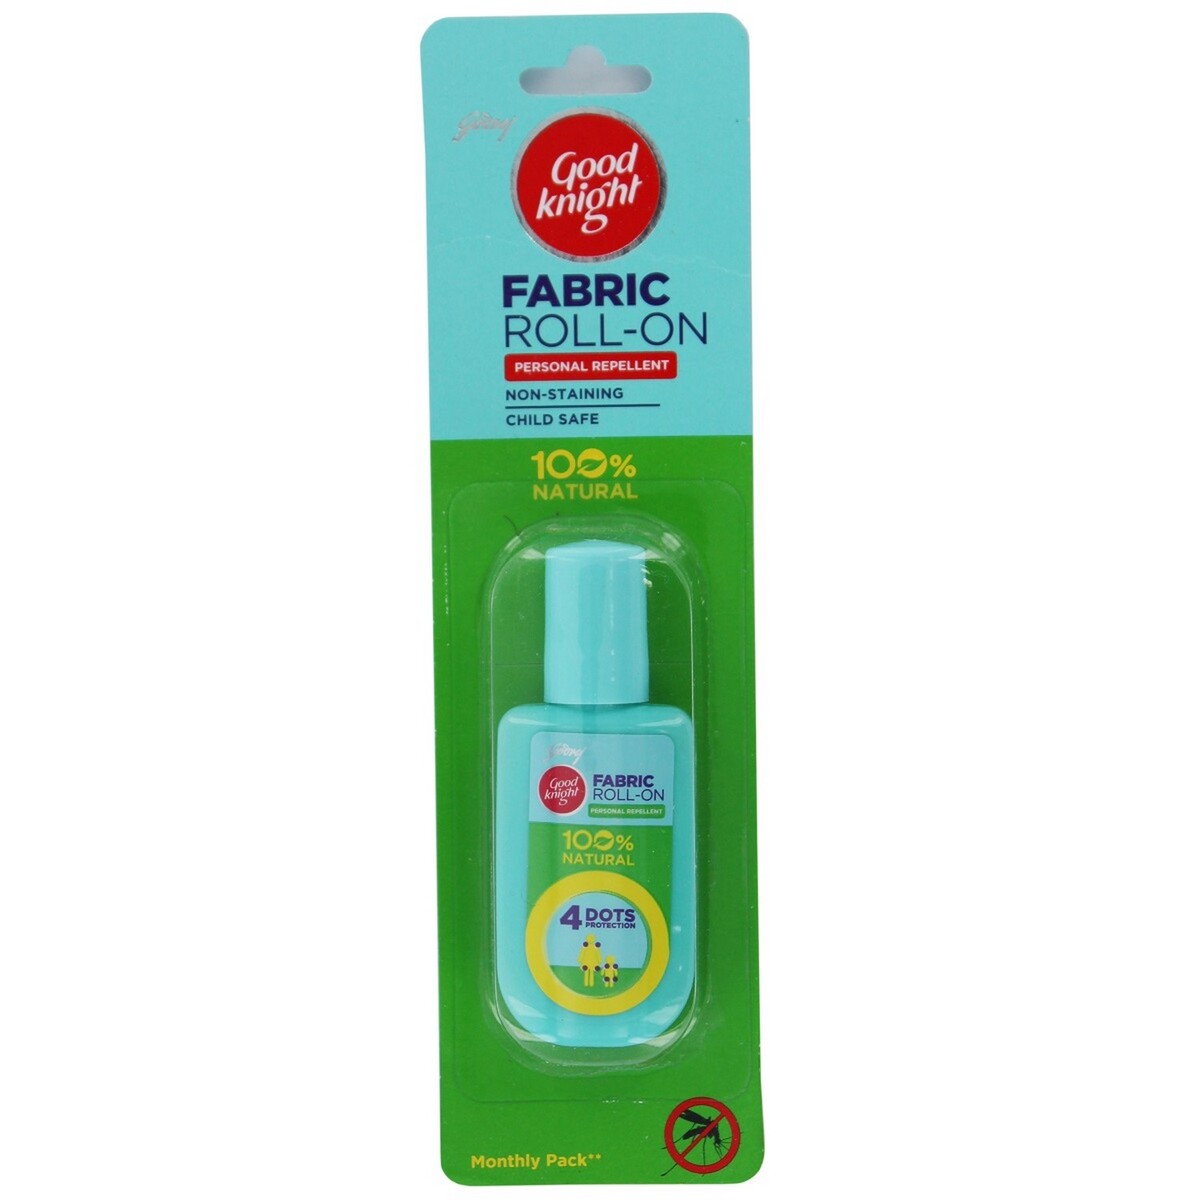 Good Knight Fabric Roll-On Personal Repellent 8ml